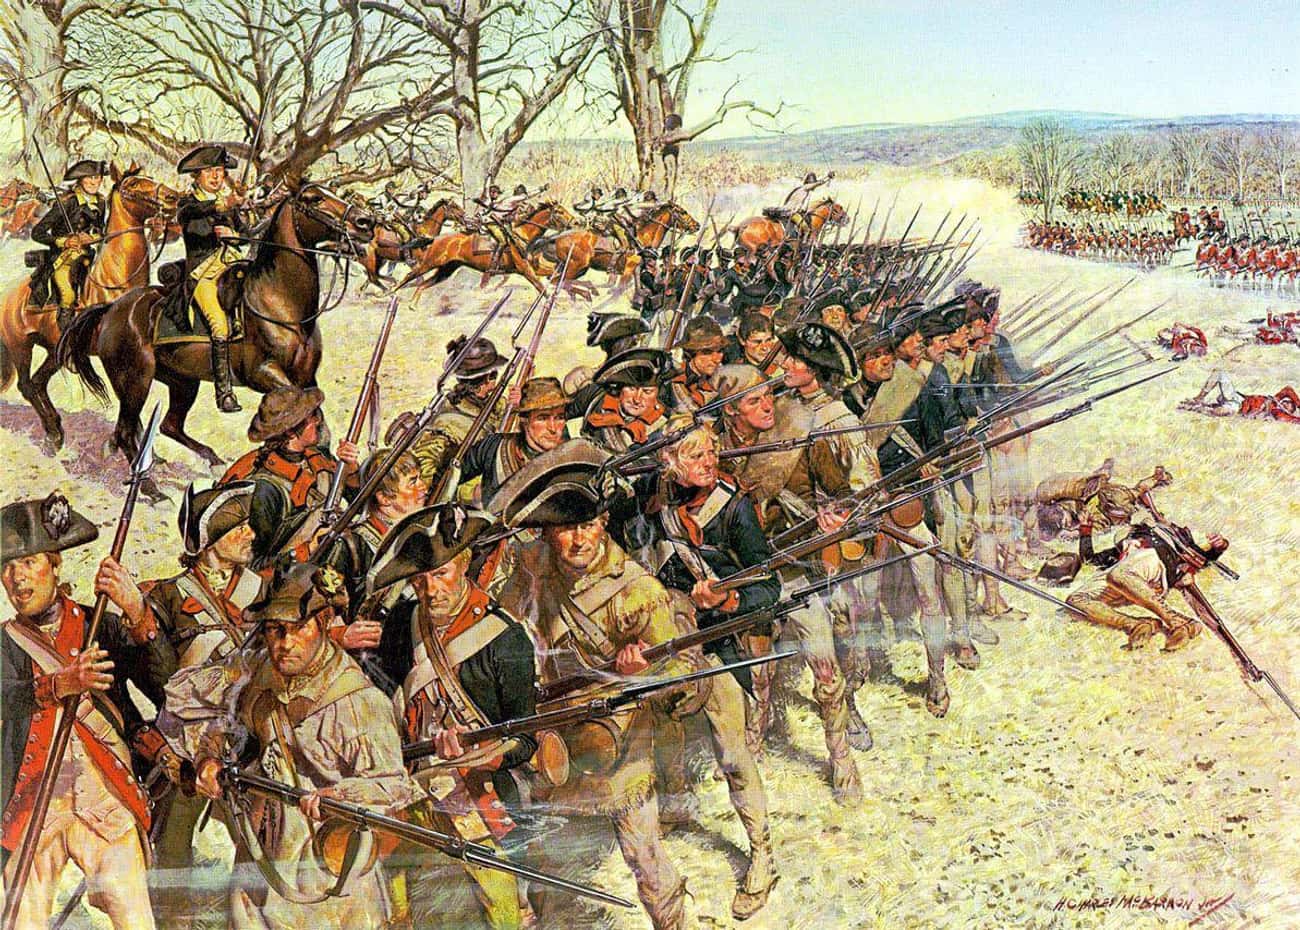 Revolution! The Continental Army